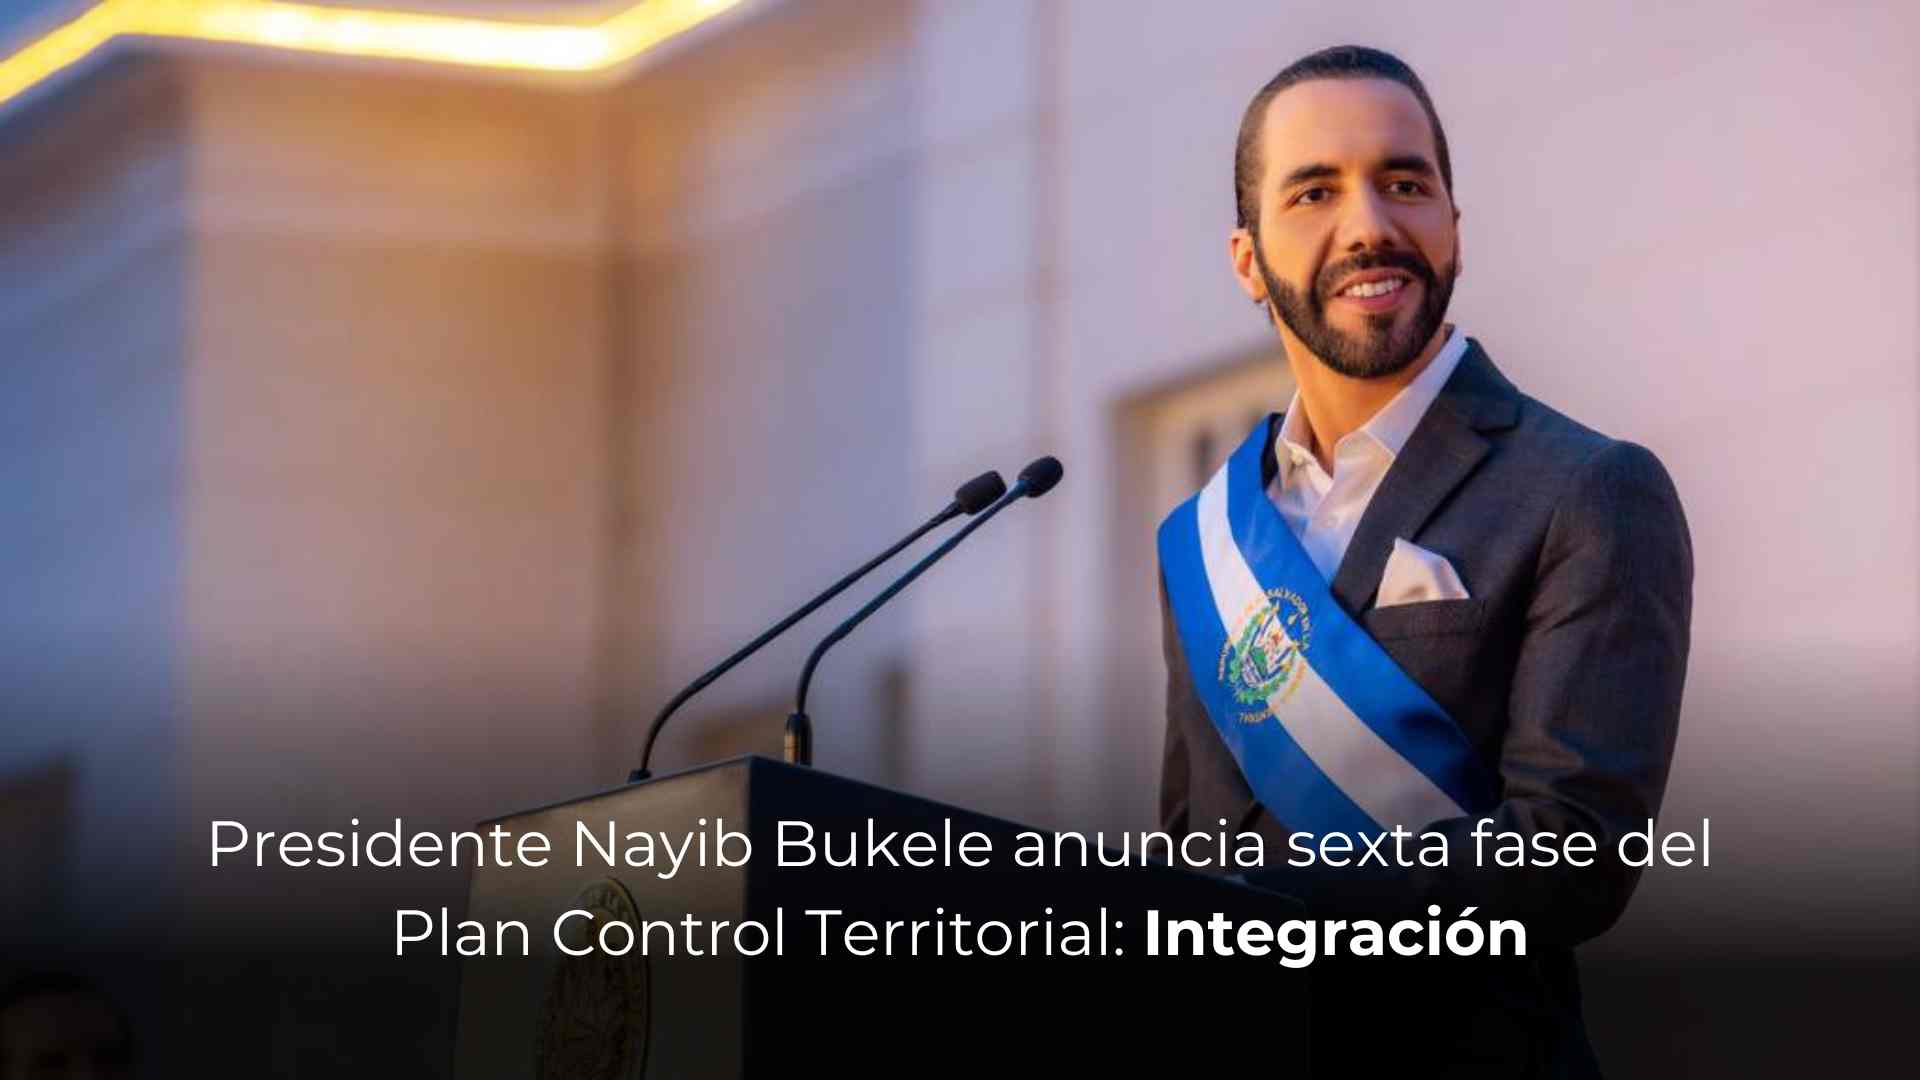 President Nayib Bukele announces sixth phase of the Territorial Control Plan: Integration